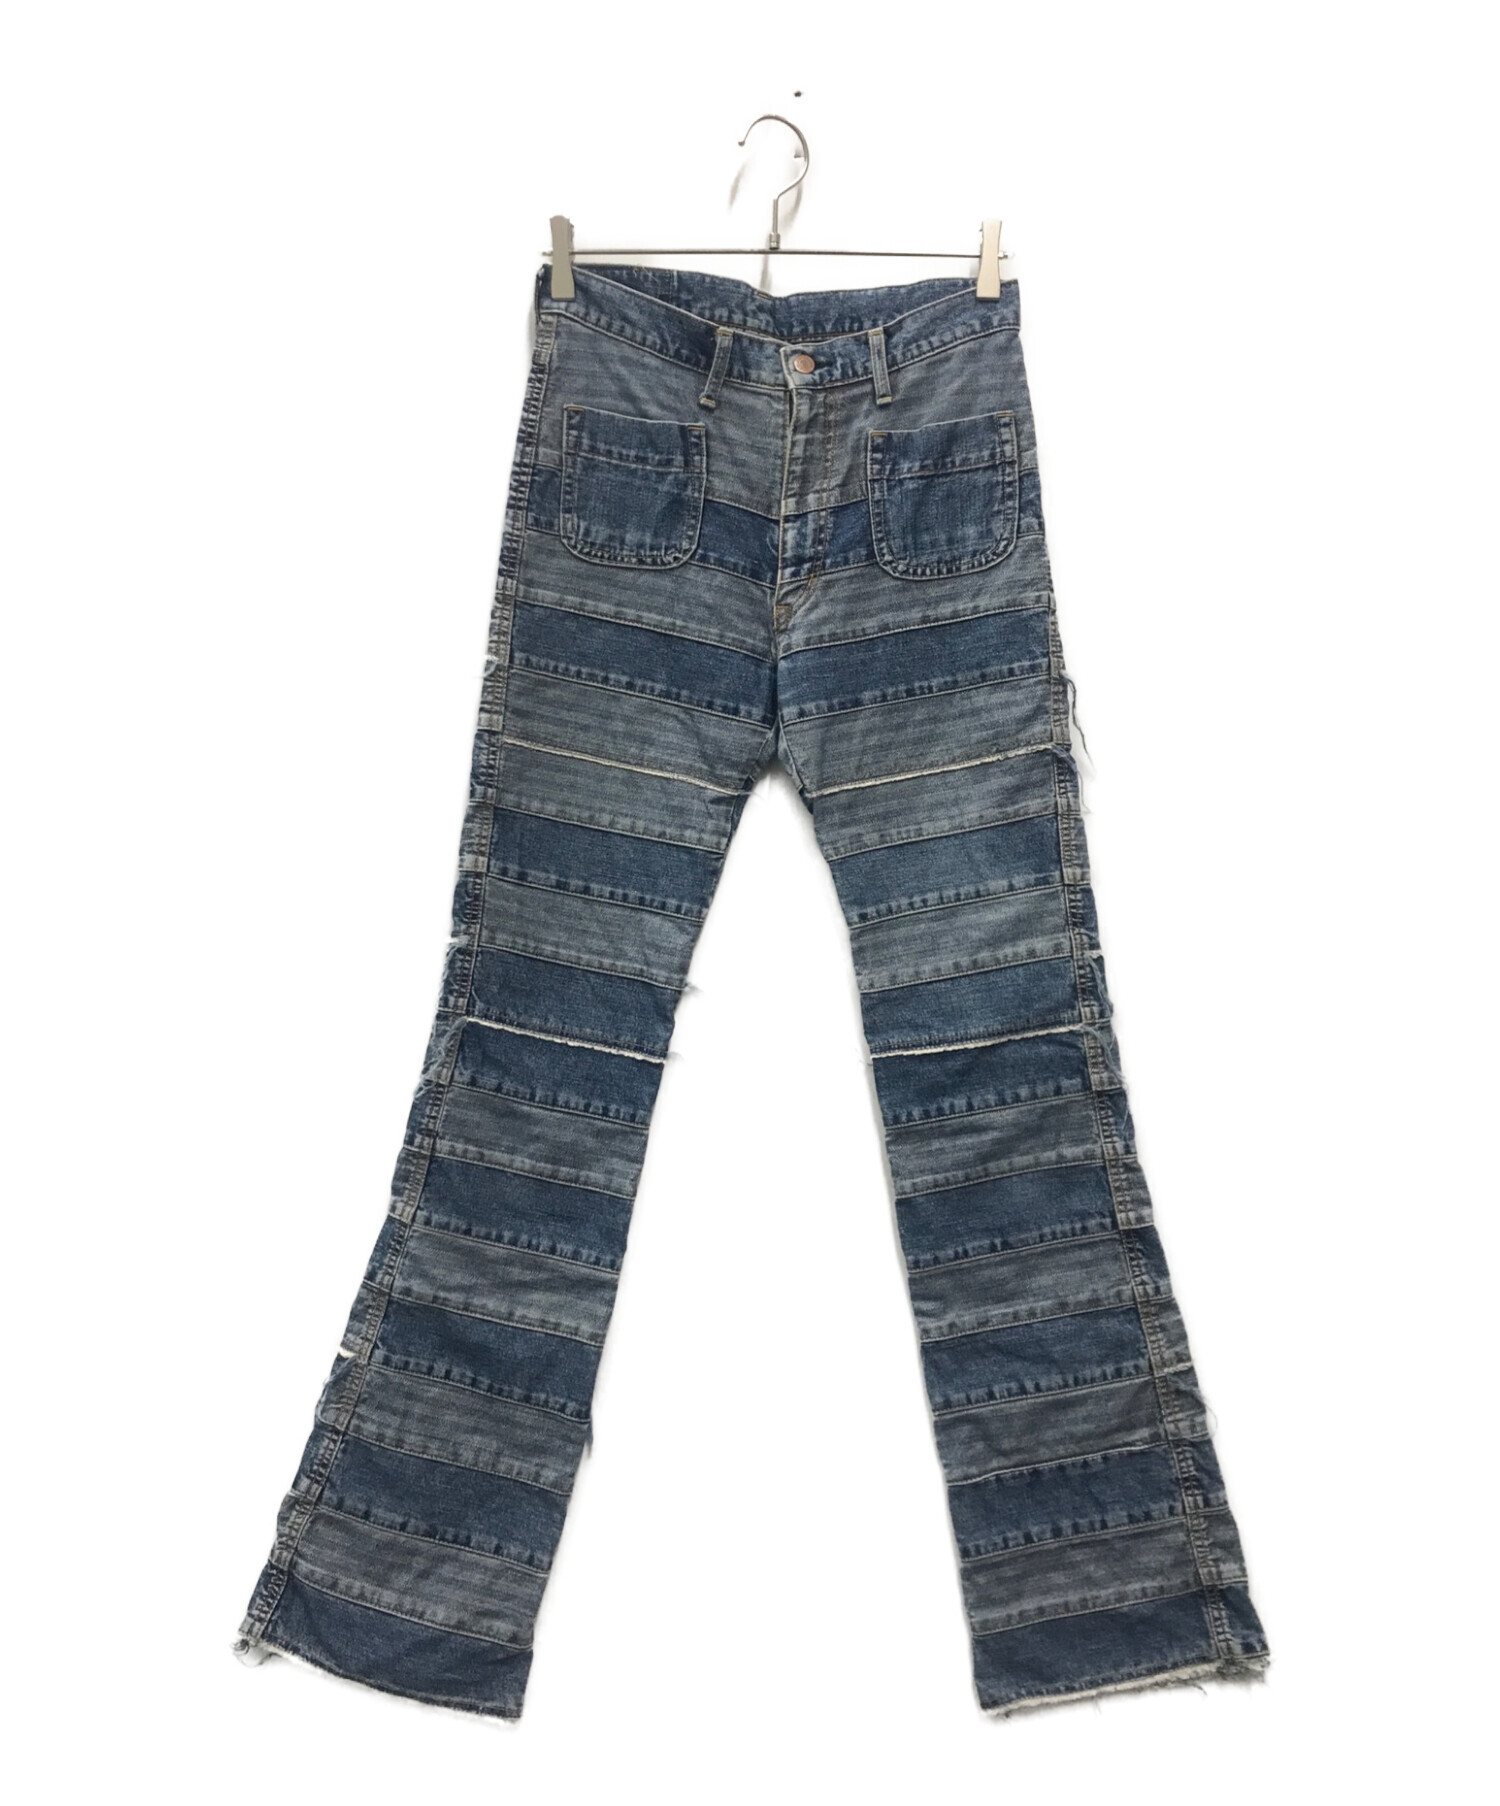 hysteric glamour kinky jeans ウミヘビデニム股上約31cm